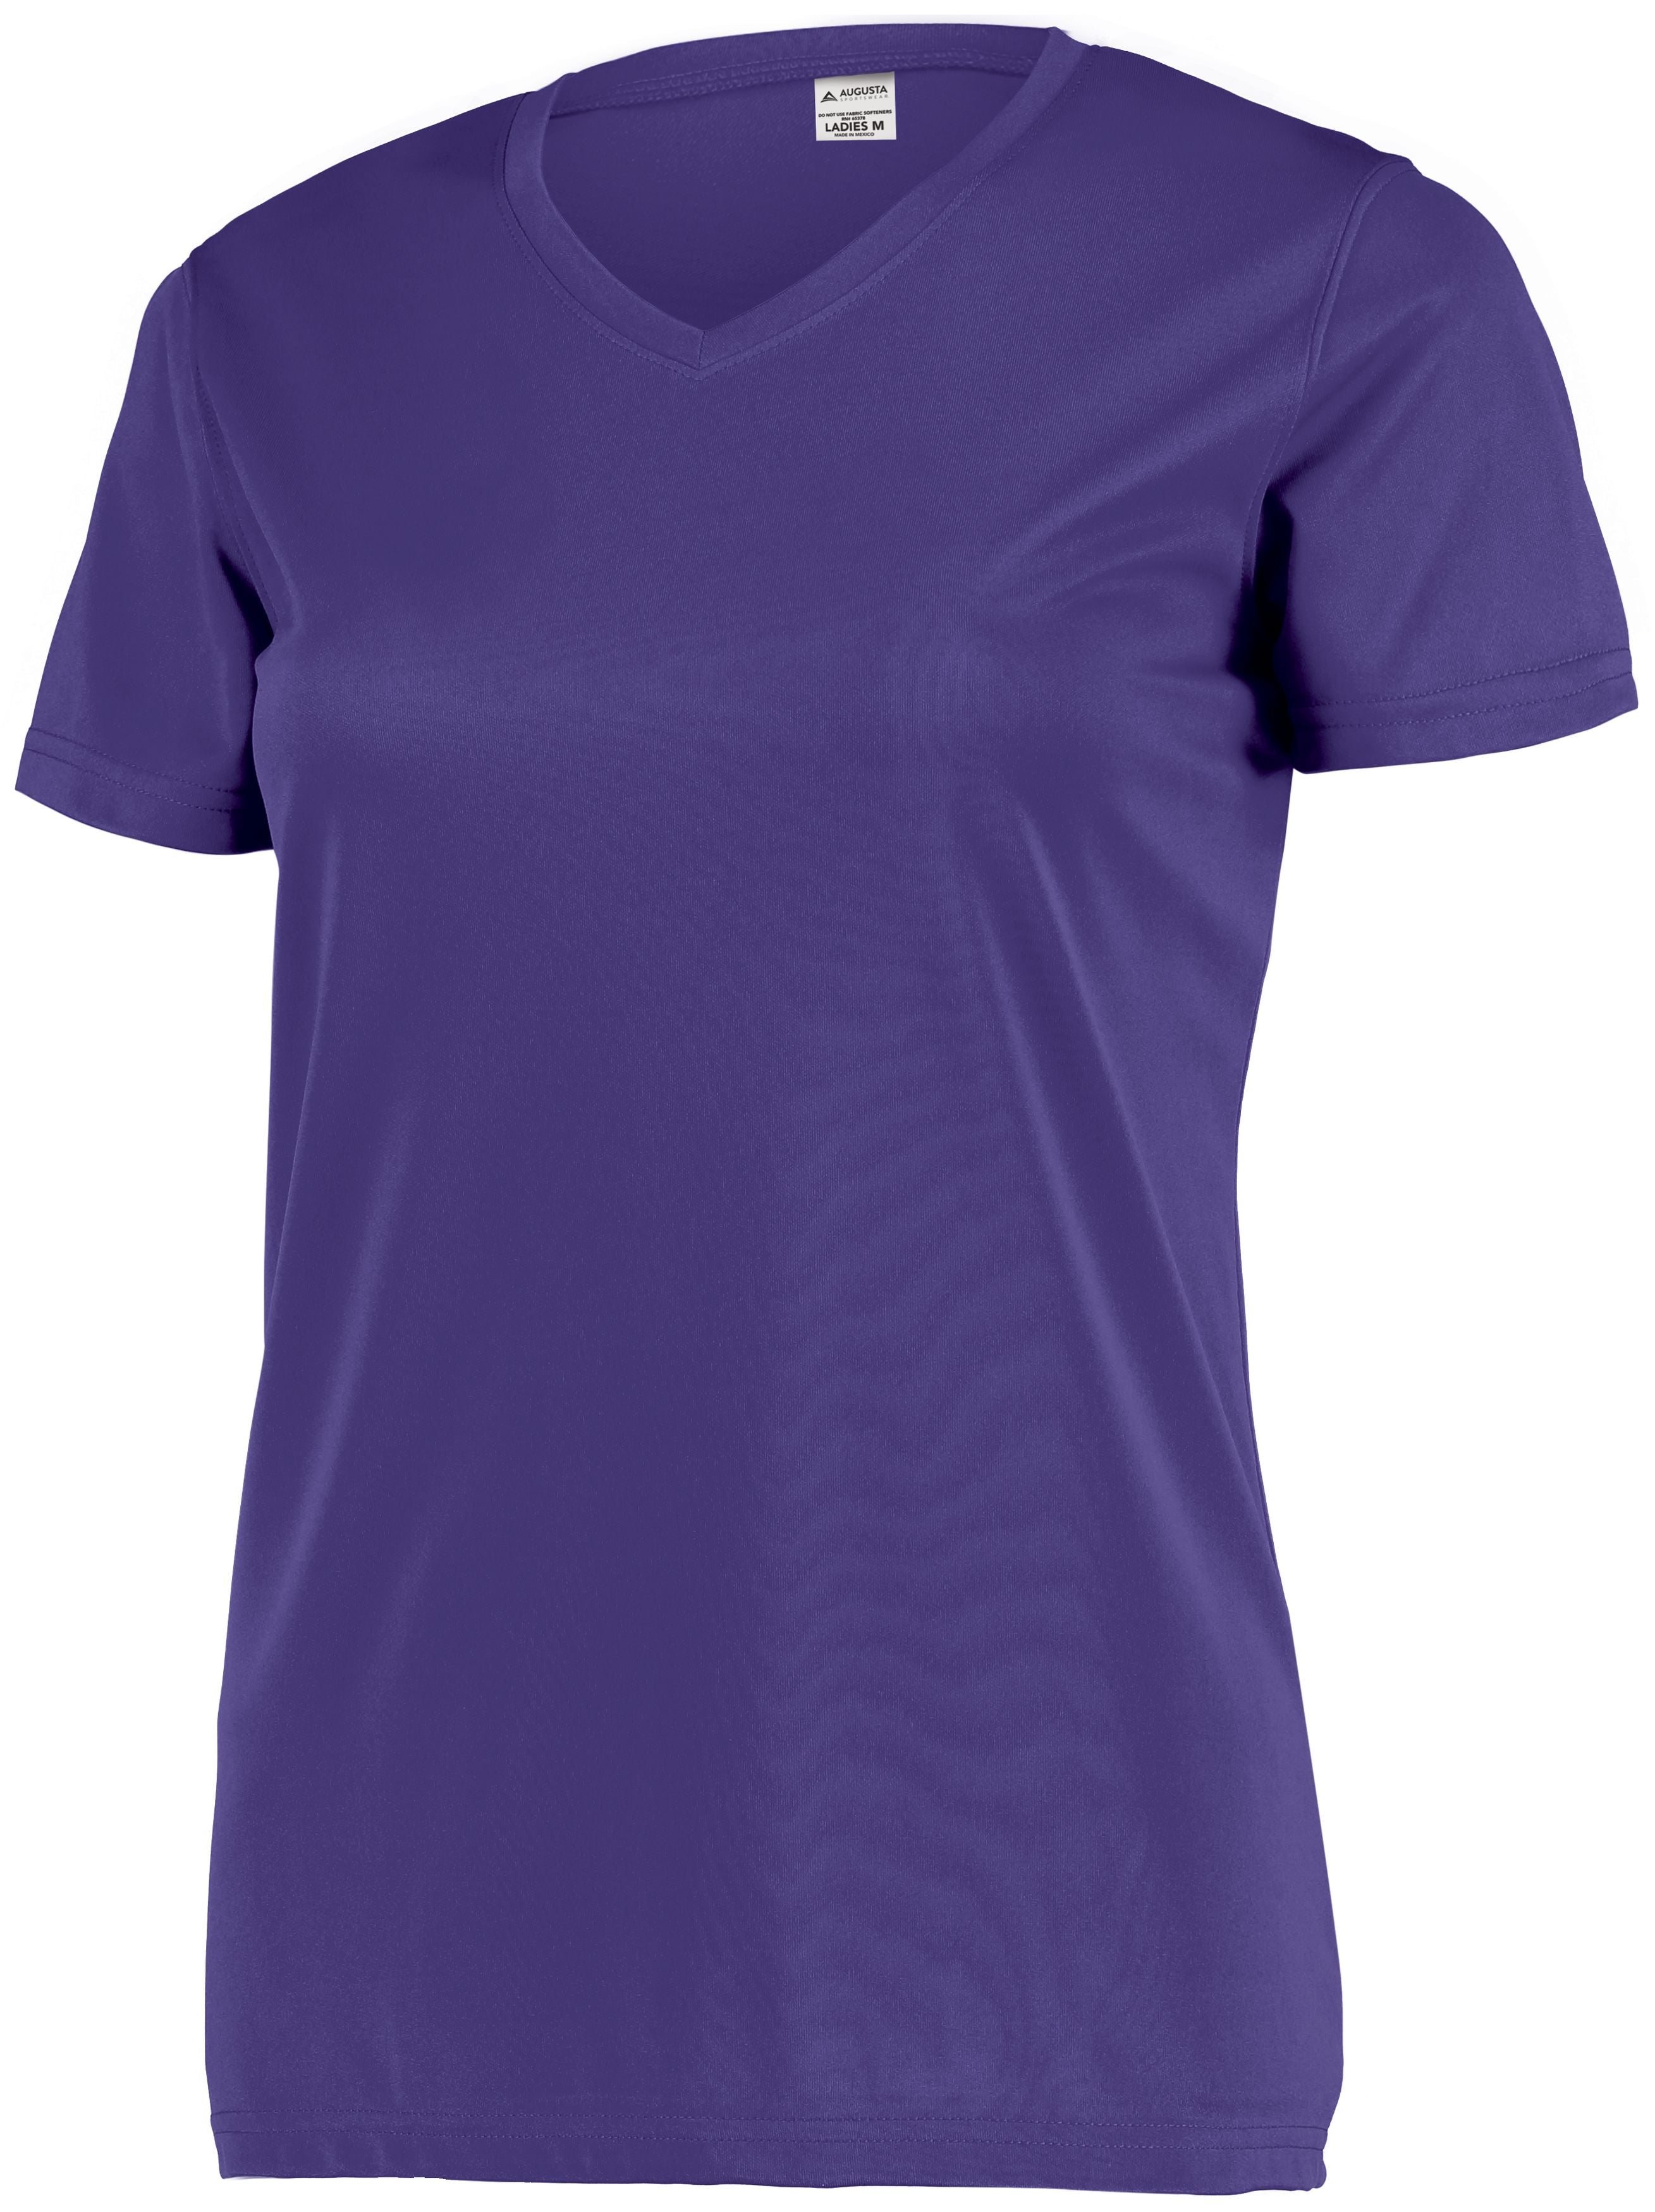 Augusta Sportswear Ladies Attain Wicking Set-In Sleeve Tee in Purple (Hlw)  -Part of the Ladies, Ladies-Tee-Shirt, T-Shirts, Augusta-Products, Shirts product lines at KanaleyCreations.com